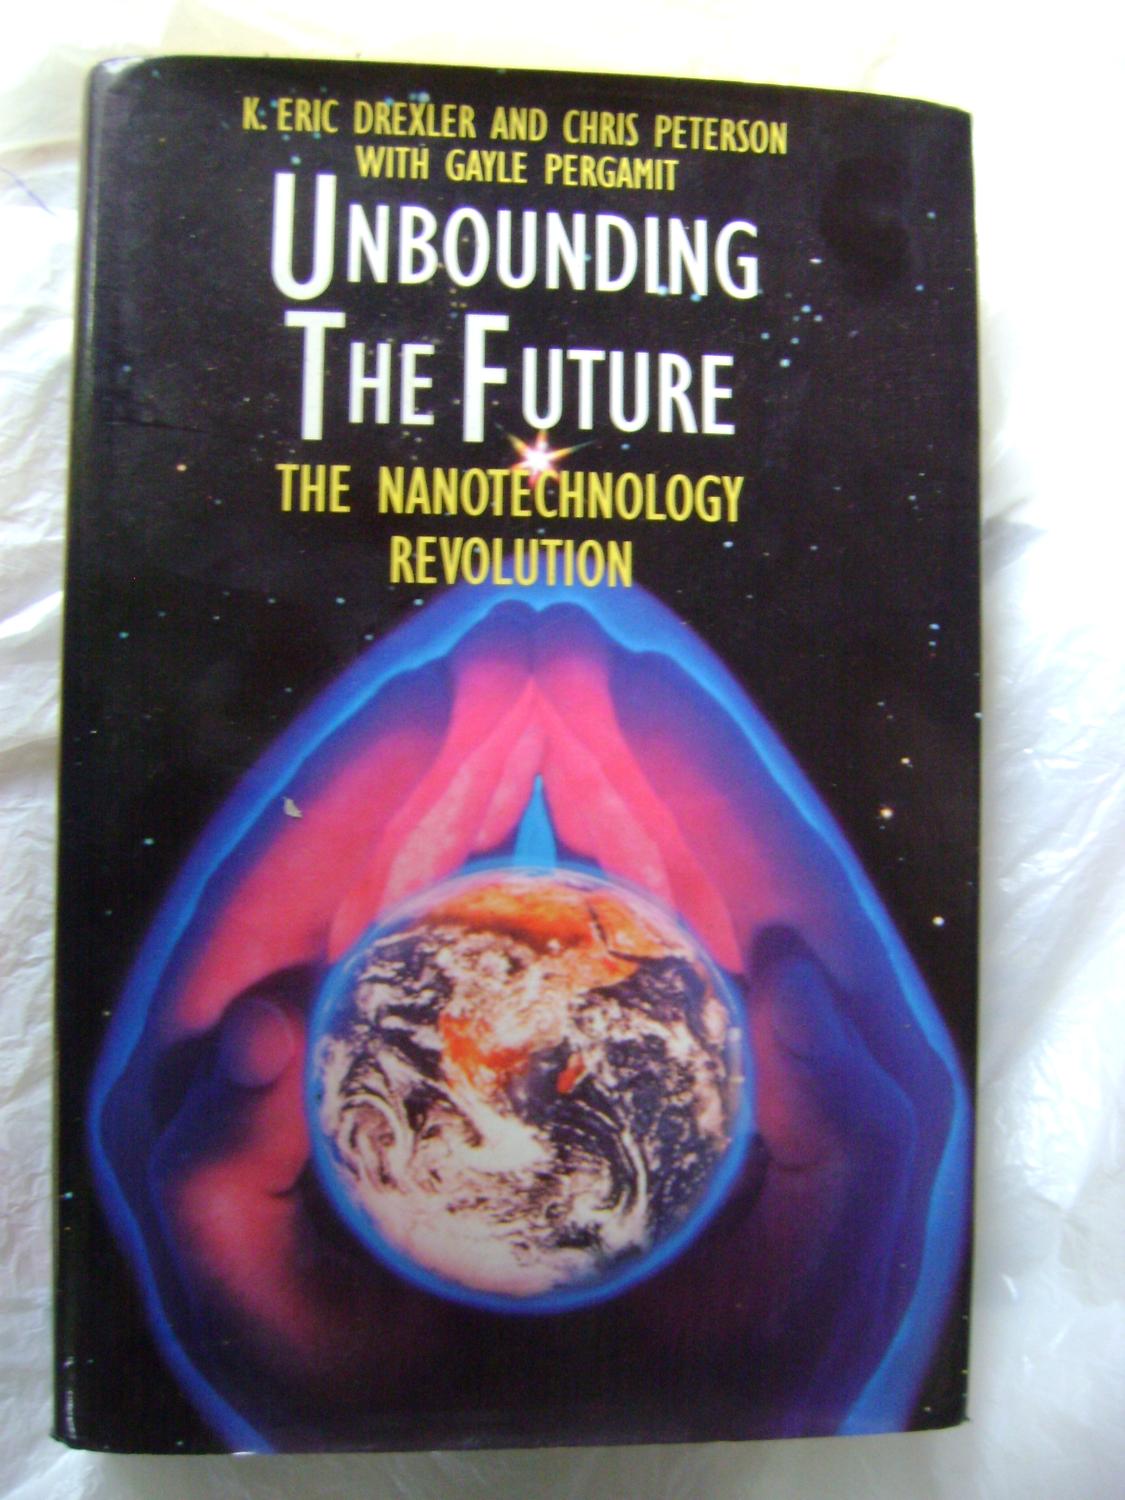 Unbounding the Future: the Nanotechnology Revolution - Eric K Drexler, Chris Peterson and Gayle Pergamit